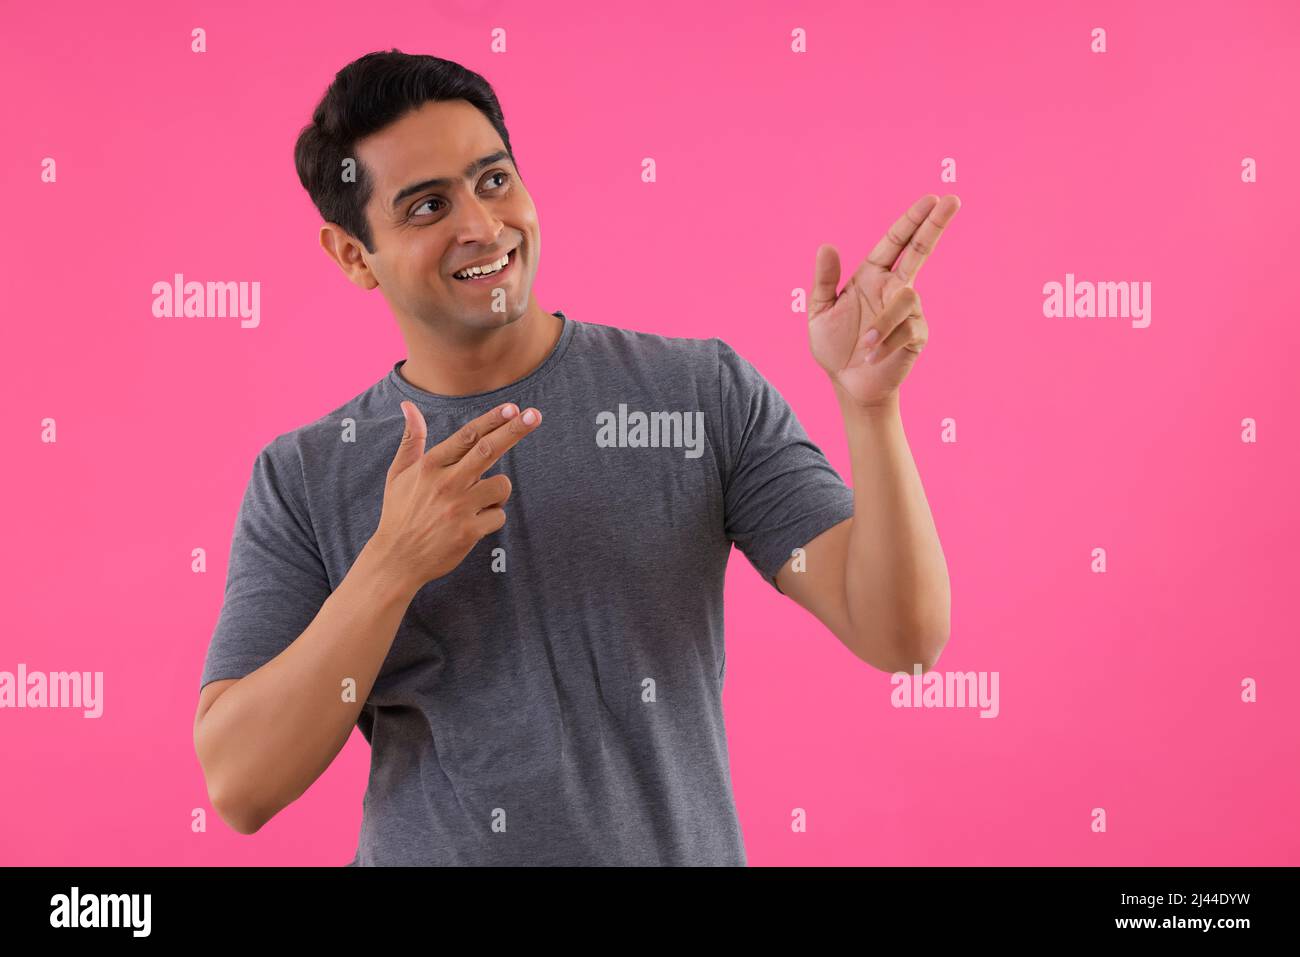 Portrait of a young man pointing away with fingers against pink background Stock Photo